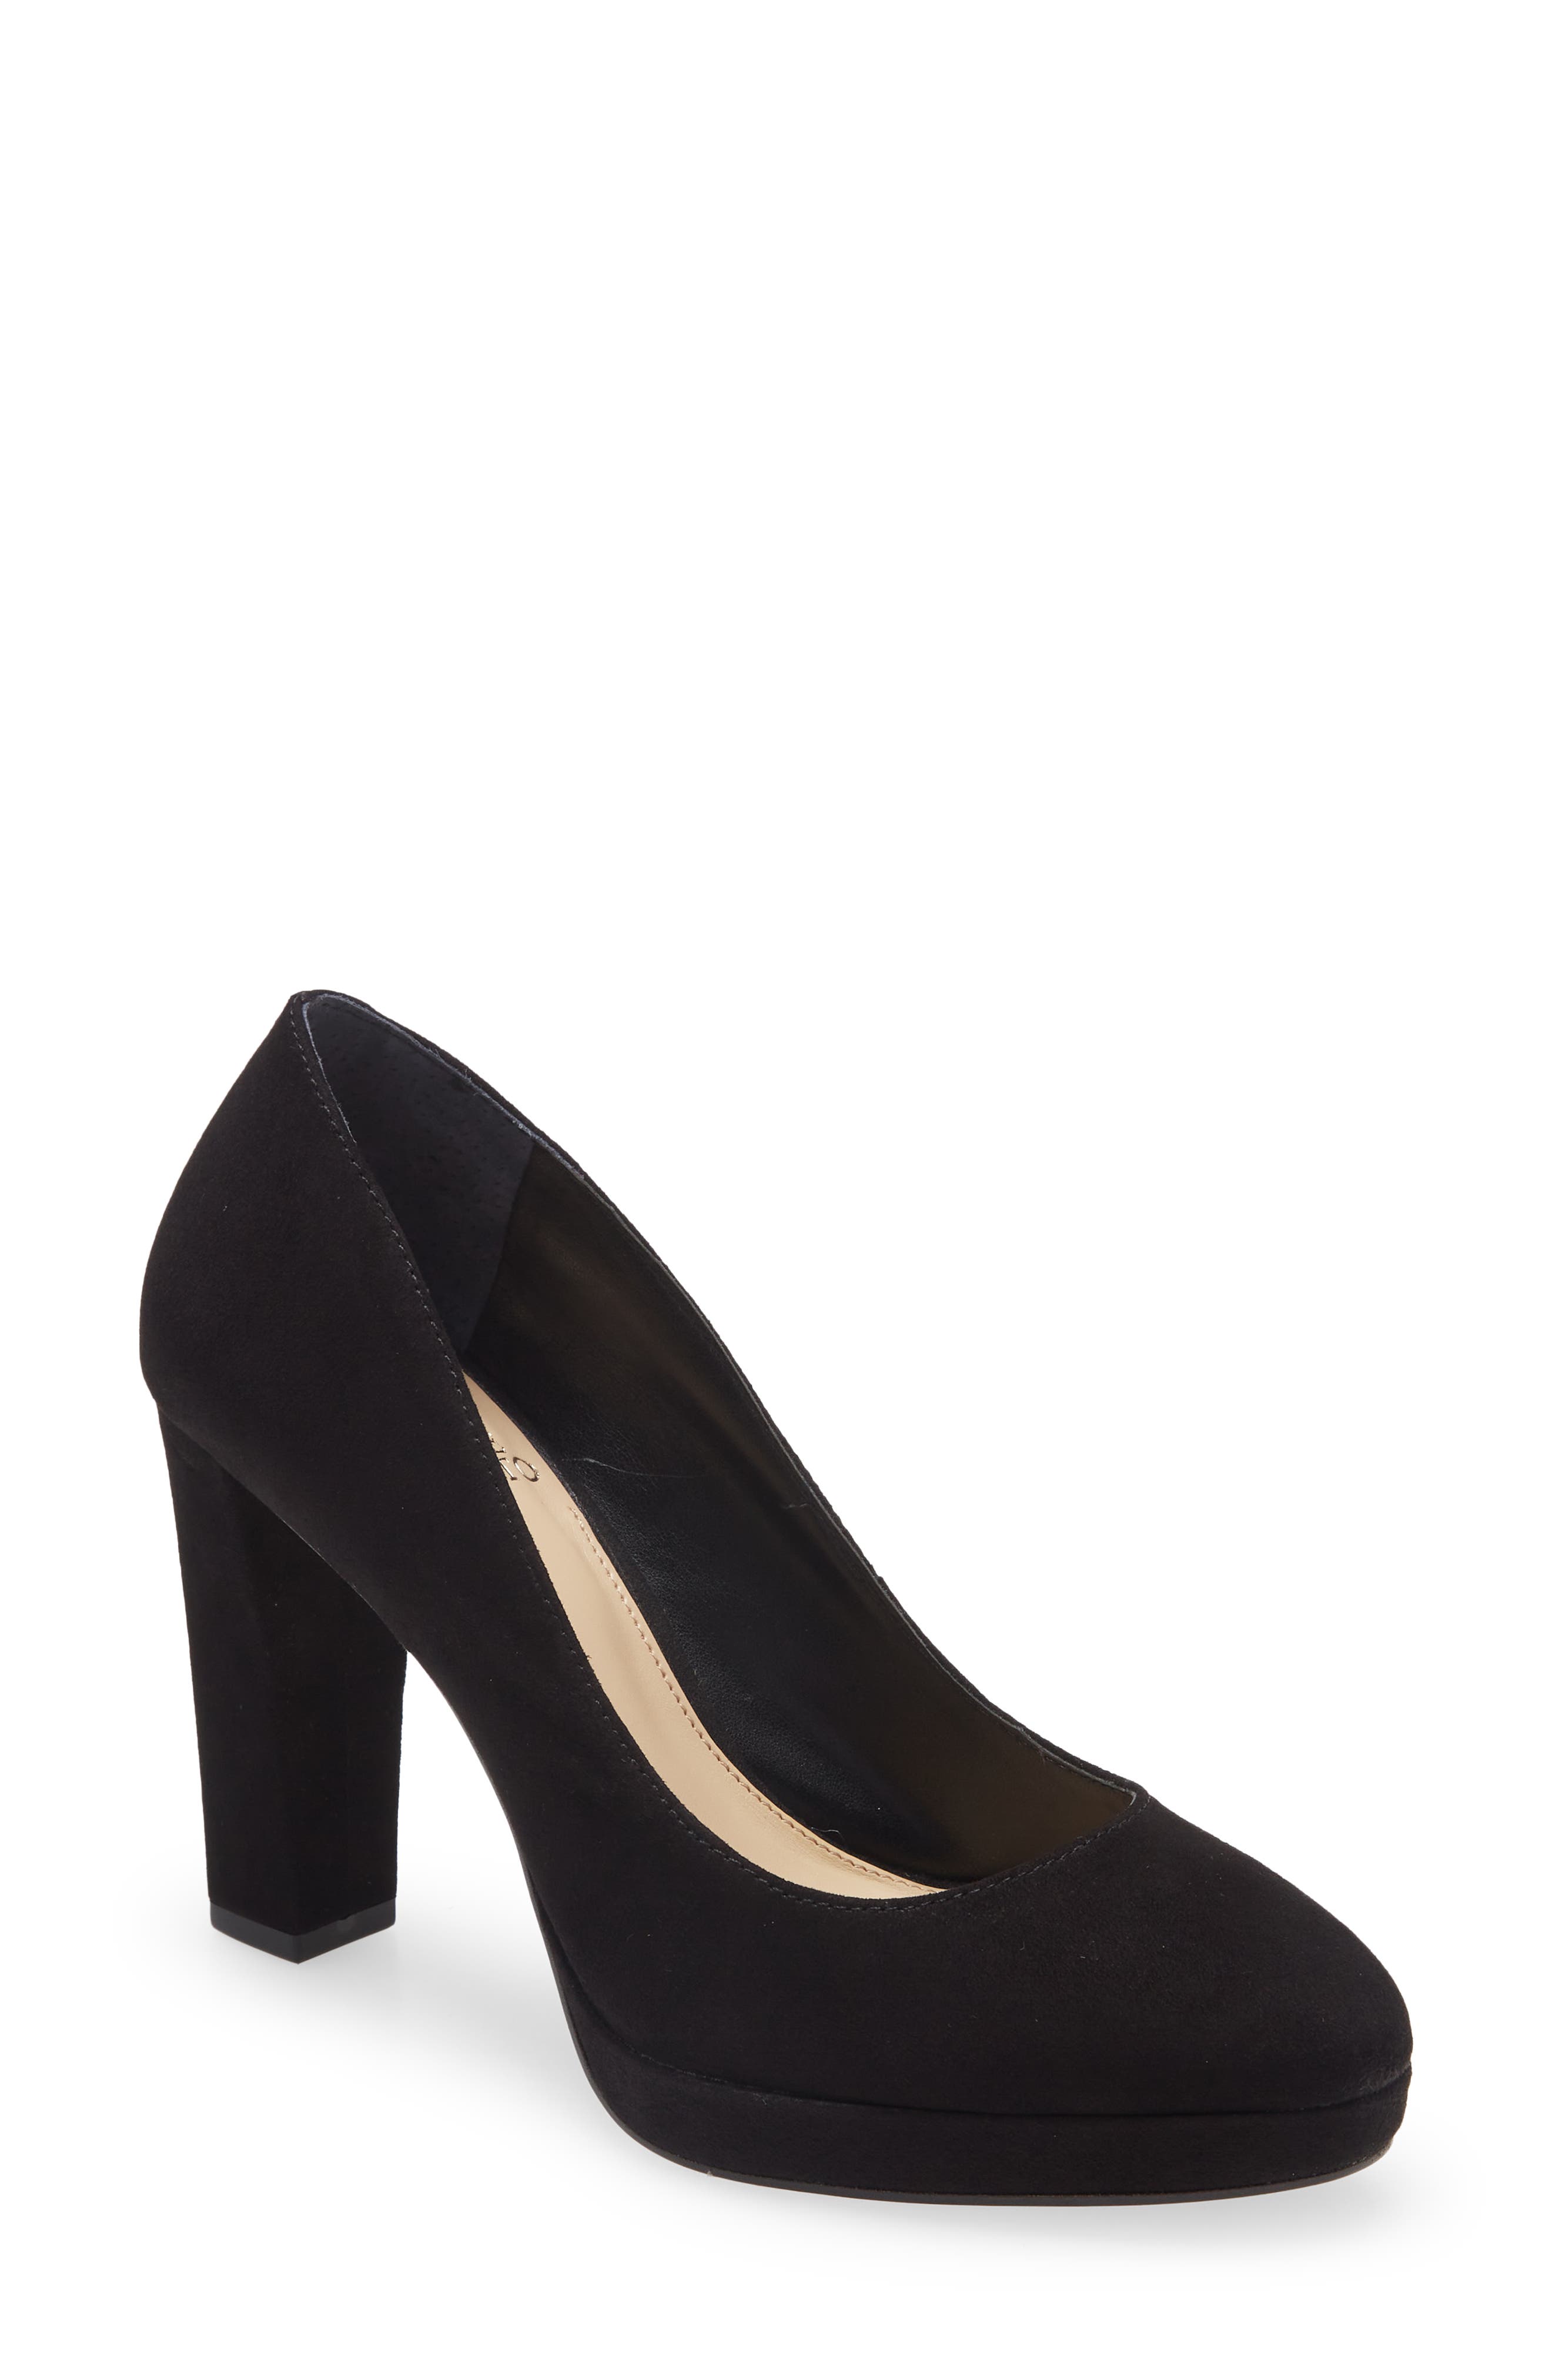 UPC 191707345539 product image for Vince Camuto Halria Pump in Black True Suede at Nordstrom, Size 7.5 | upcitemdb.com